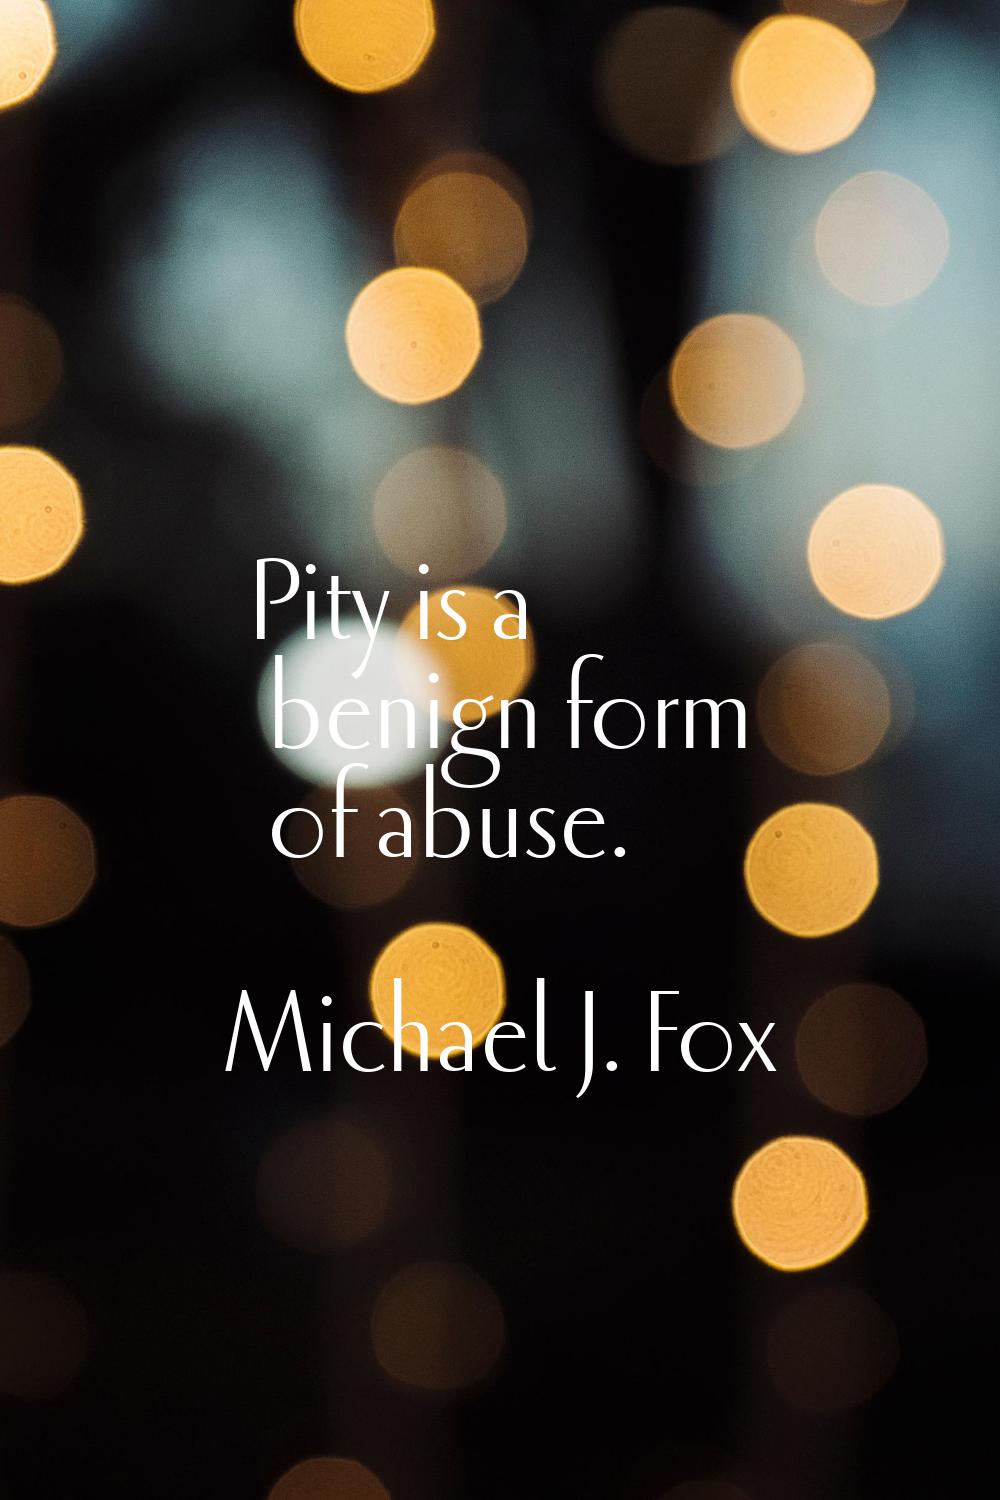 Pity is a benign form of abuse.